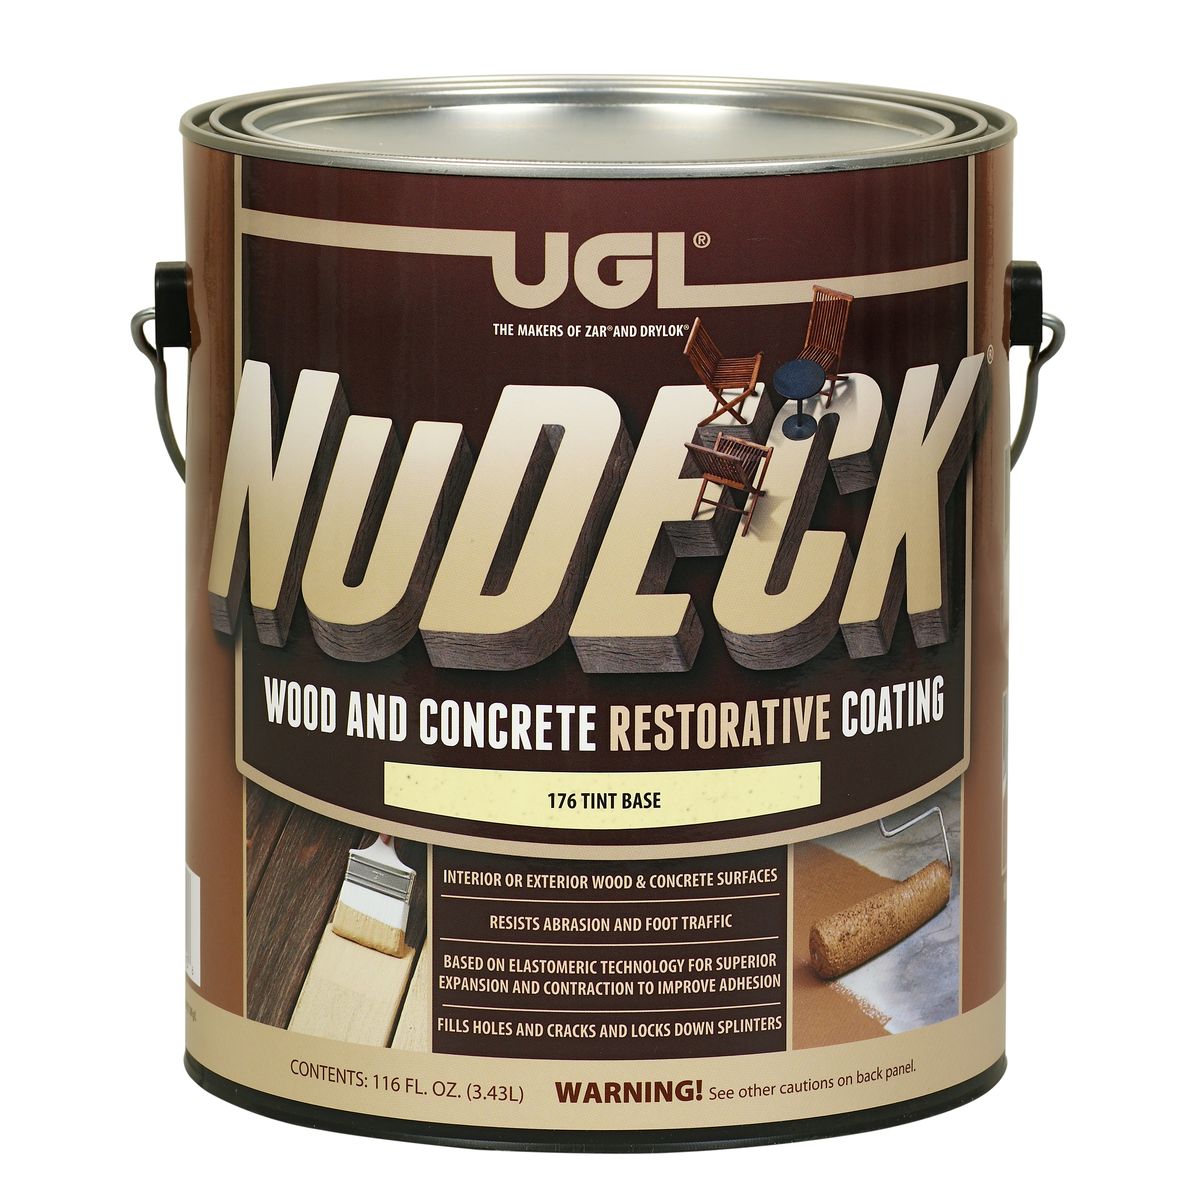 United Gilsonite Laboratory introduced NuDECK, a coating designed to renew damaged concrete and wood decking surfaces, at World of Concrete 2015.